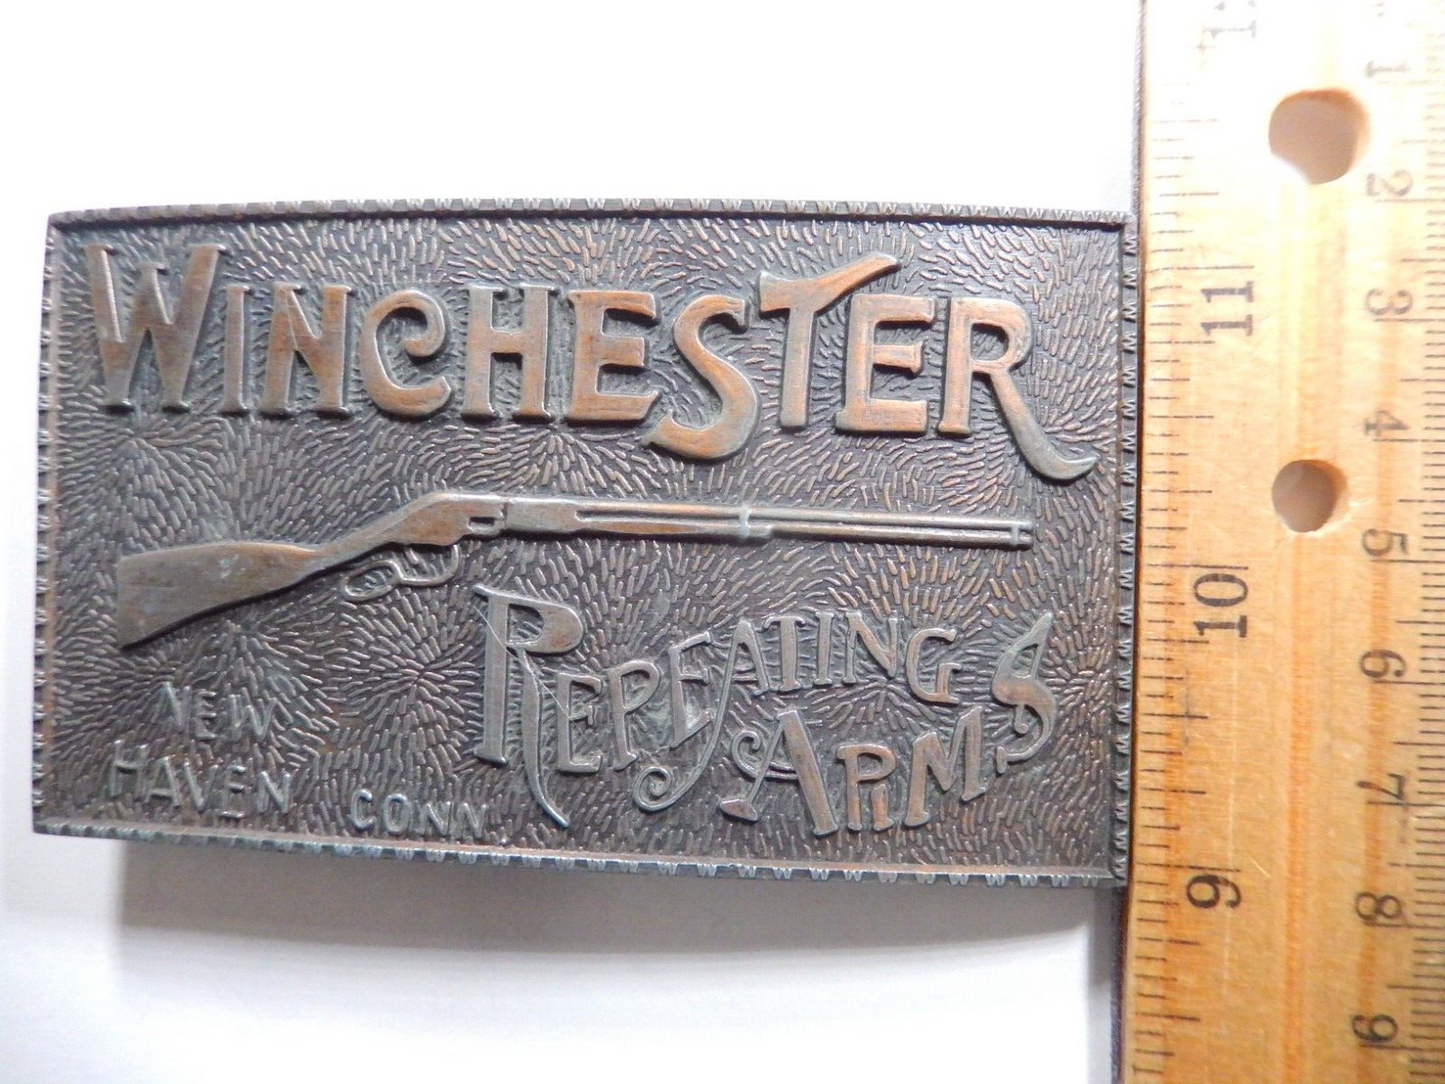 USED Vintage Metal Winchester Repeating Arms New Haven Conn. Belt Buckle. NICE!